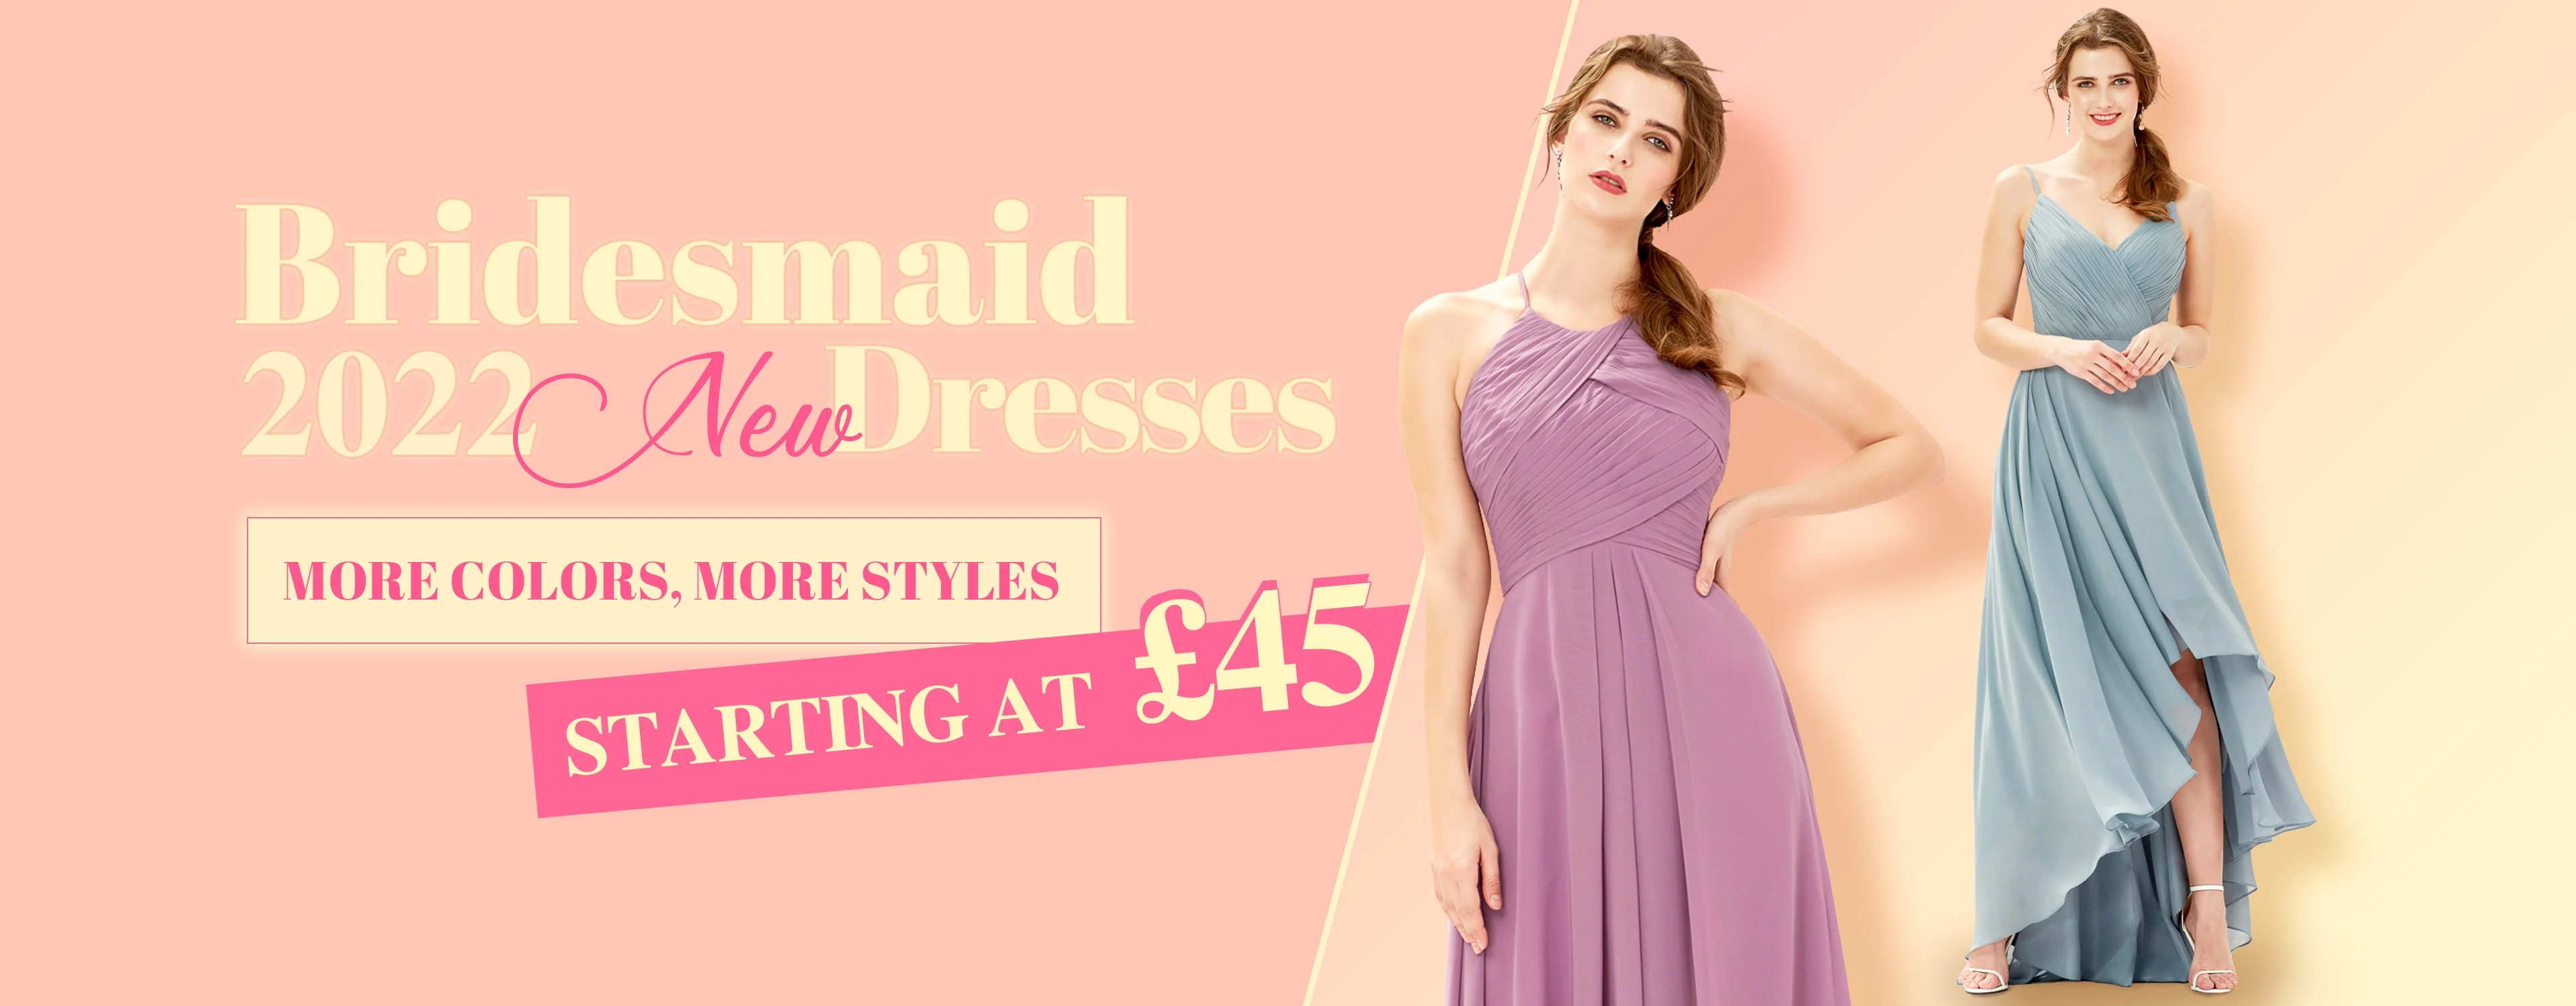 Lela Rose - Bridal And Bridesmaid Dresses Right On Trend